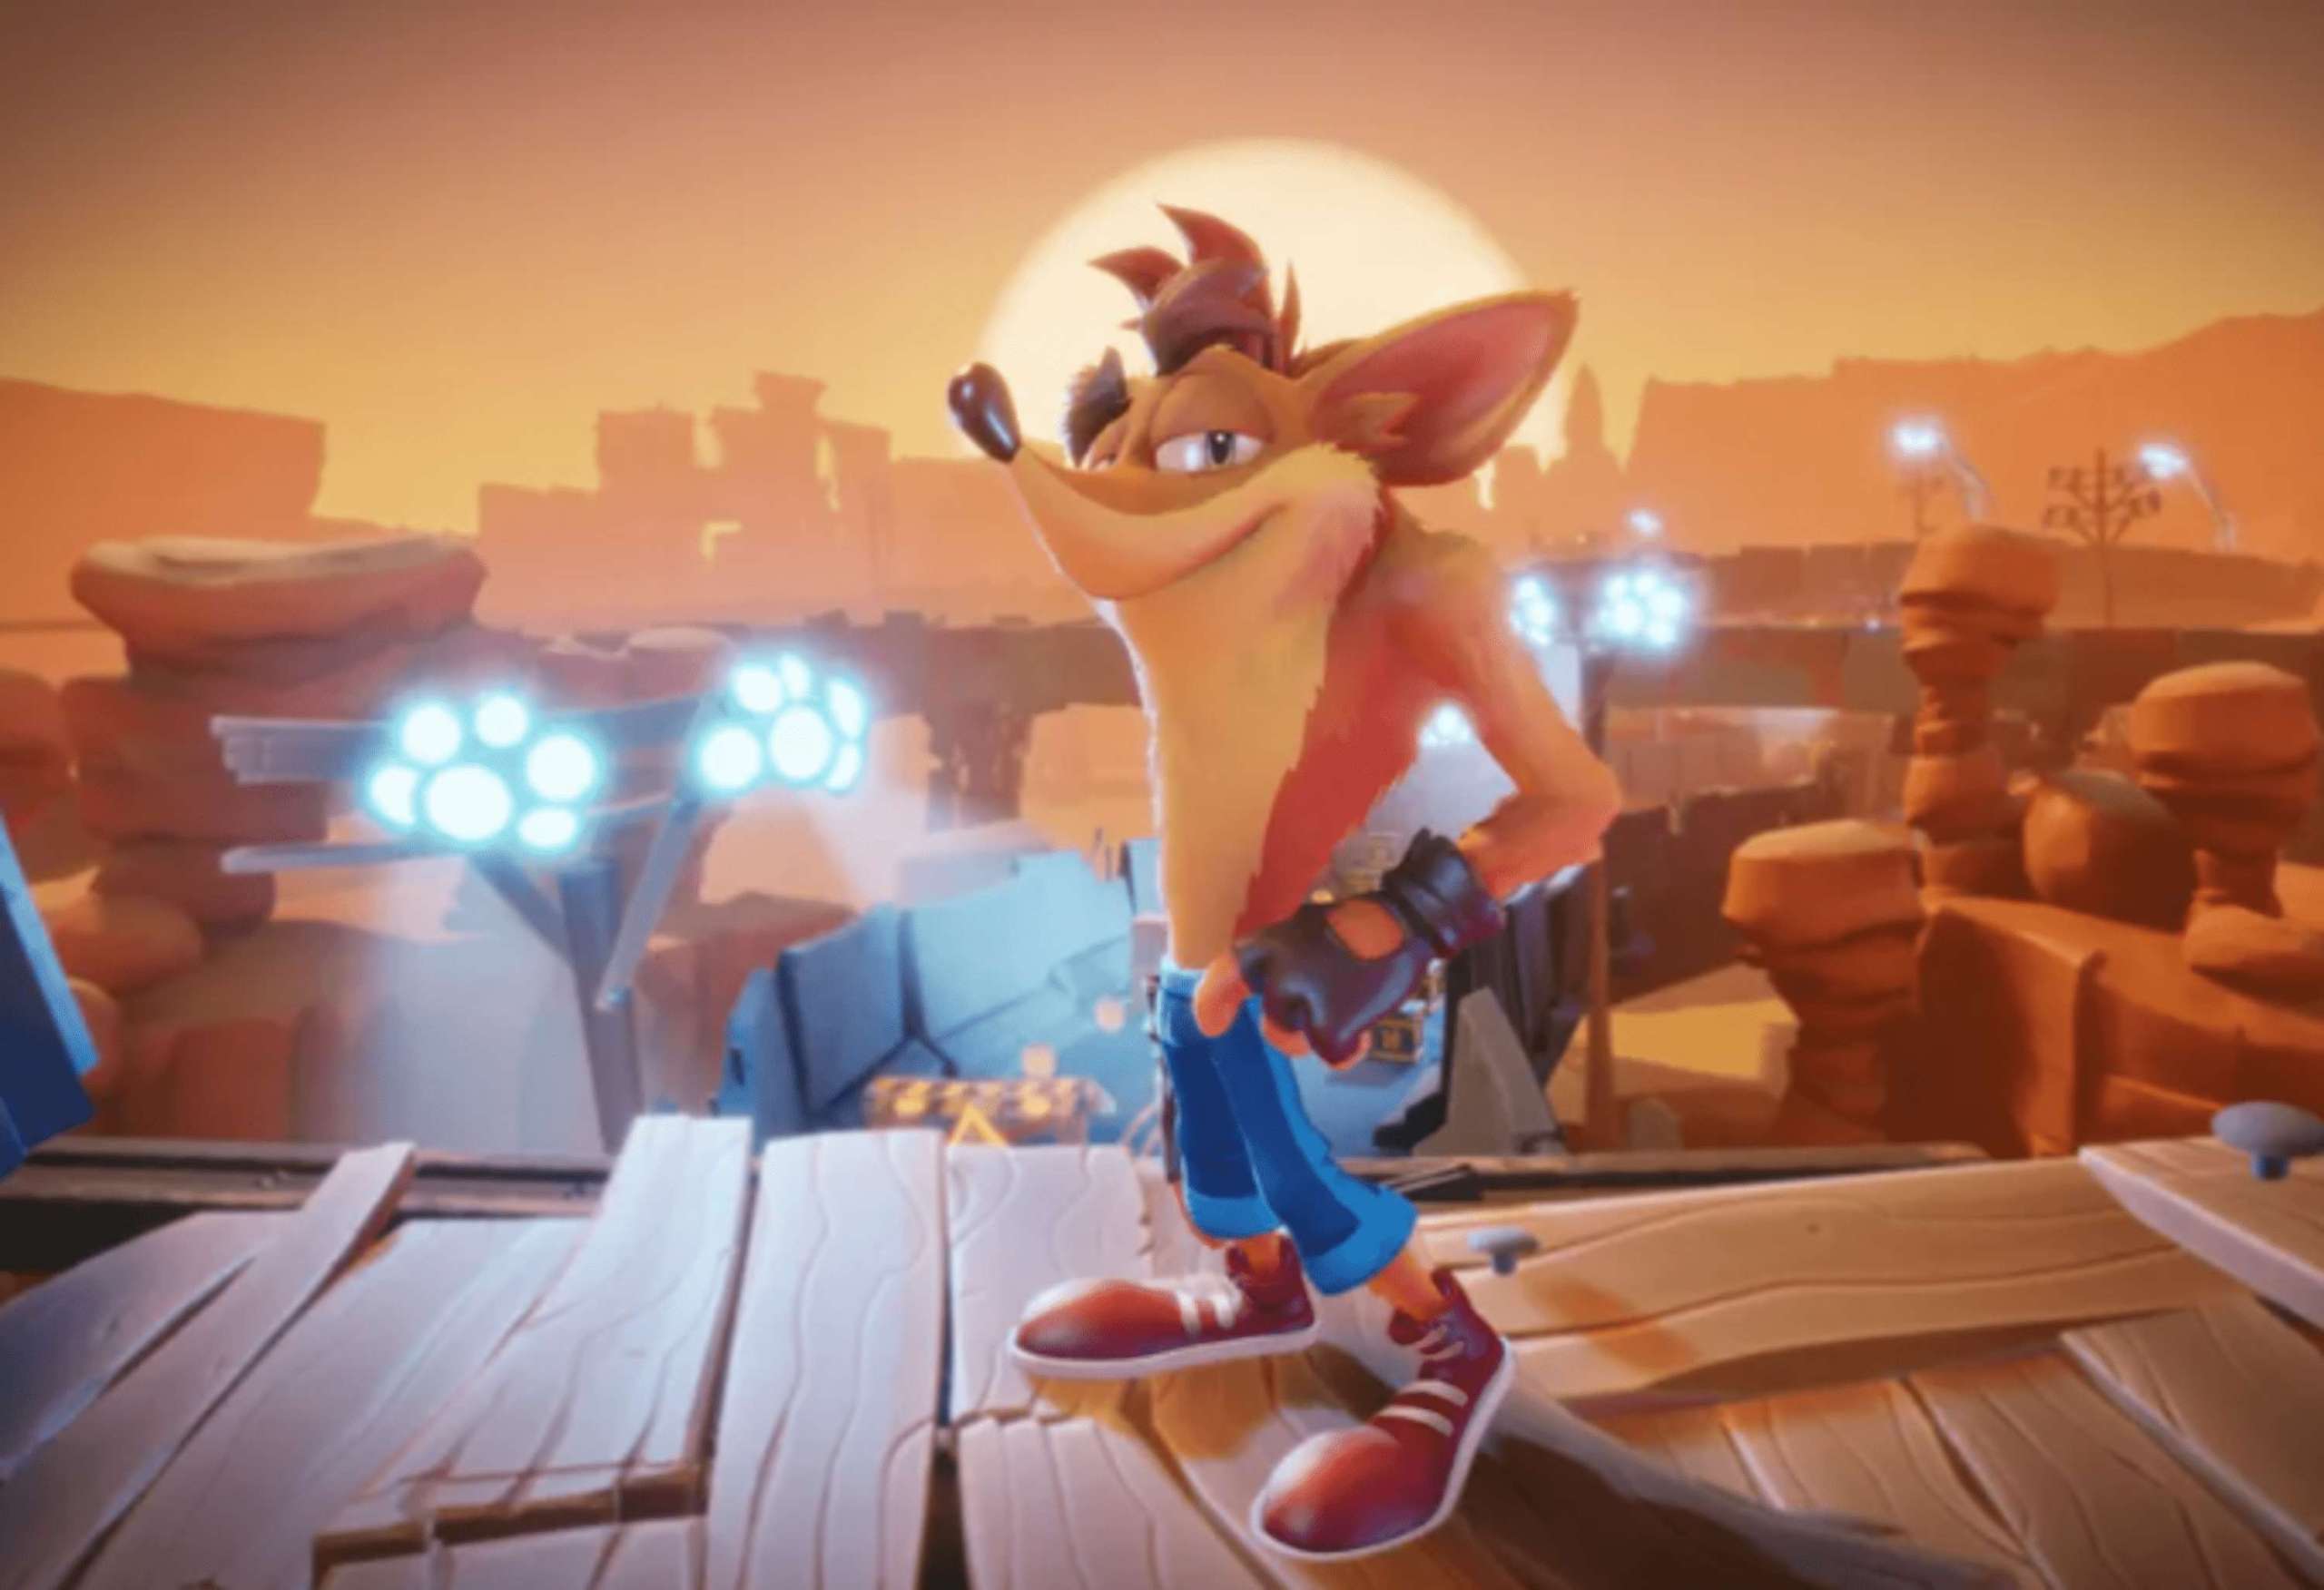 Crash Bandicoot’s Secret Minigame Is Being Remade By Fans